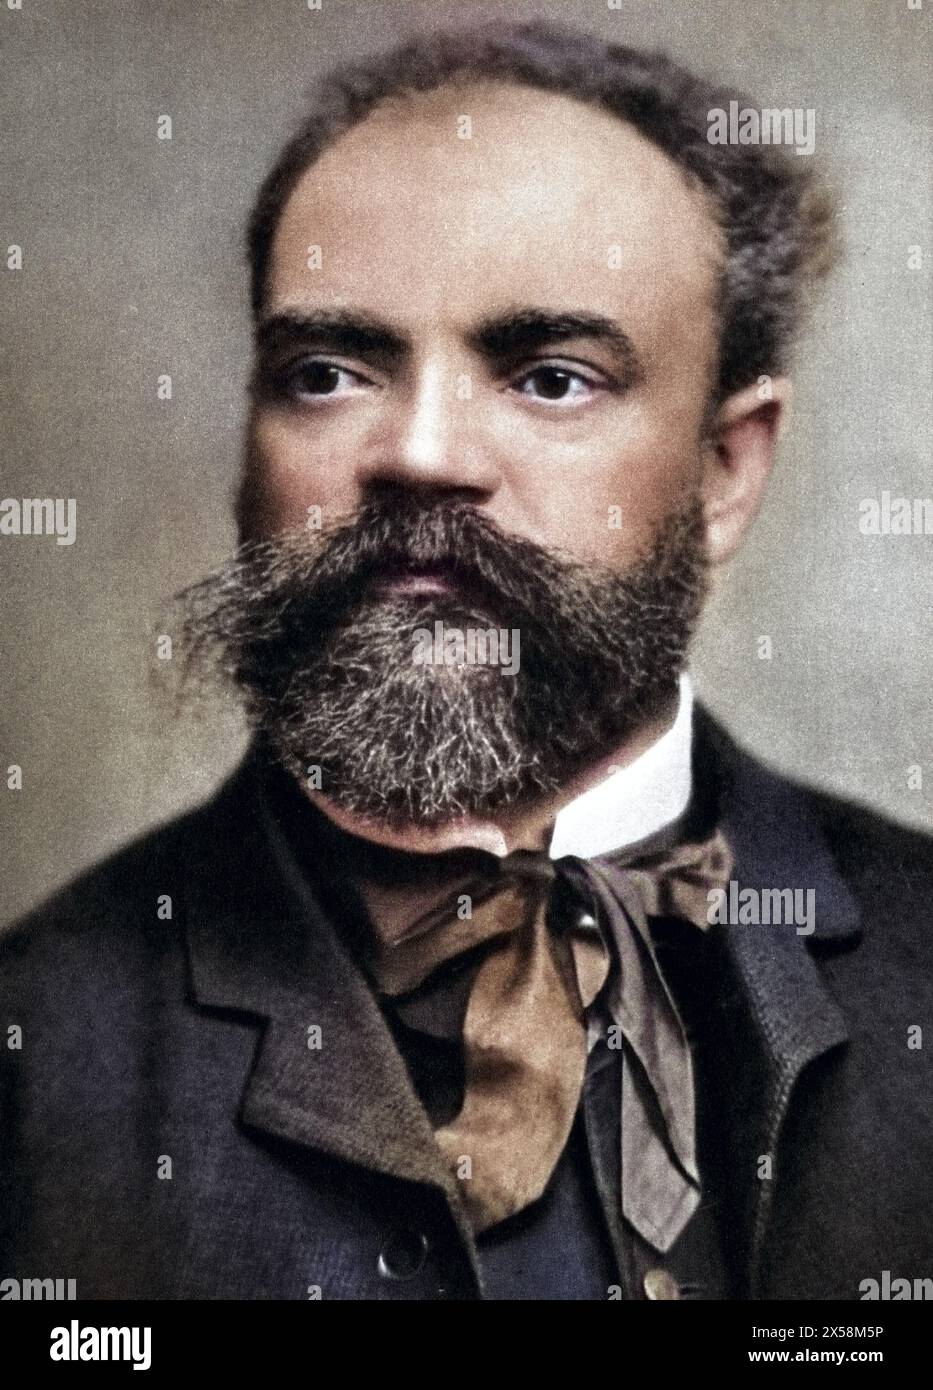 Dvorak, Antonin, 8.9.1841 - 1.5.1904, Czech composer, portrait, 1891, ADDITIONAL-RIGHTS-CLEARANCE-INFO-NOT-AVAILABLE Stock Photo